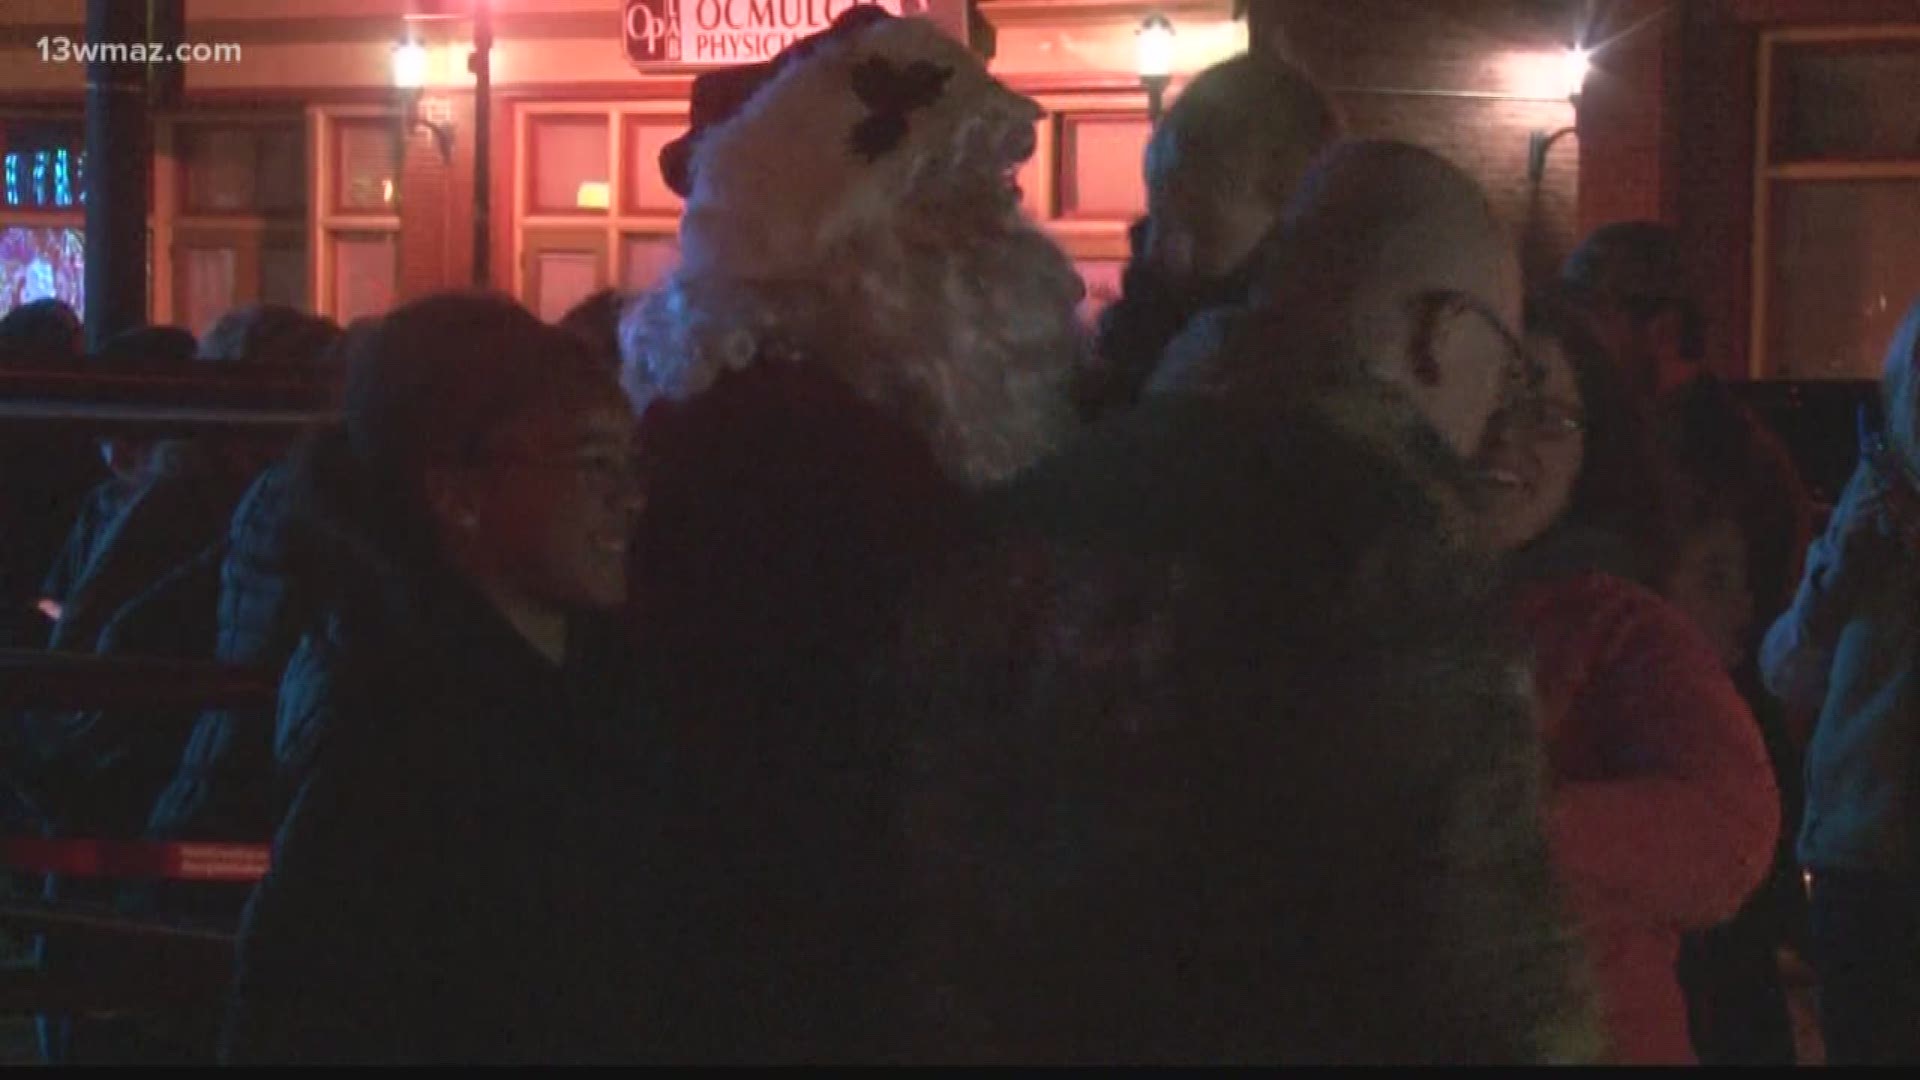 Santa stopped by on Saturday night along with his reindeer to take pictures with kids and their families on Poplar Street.